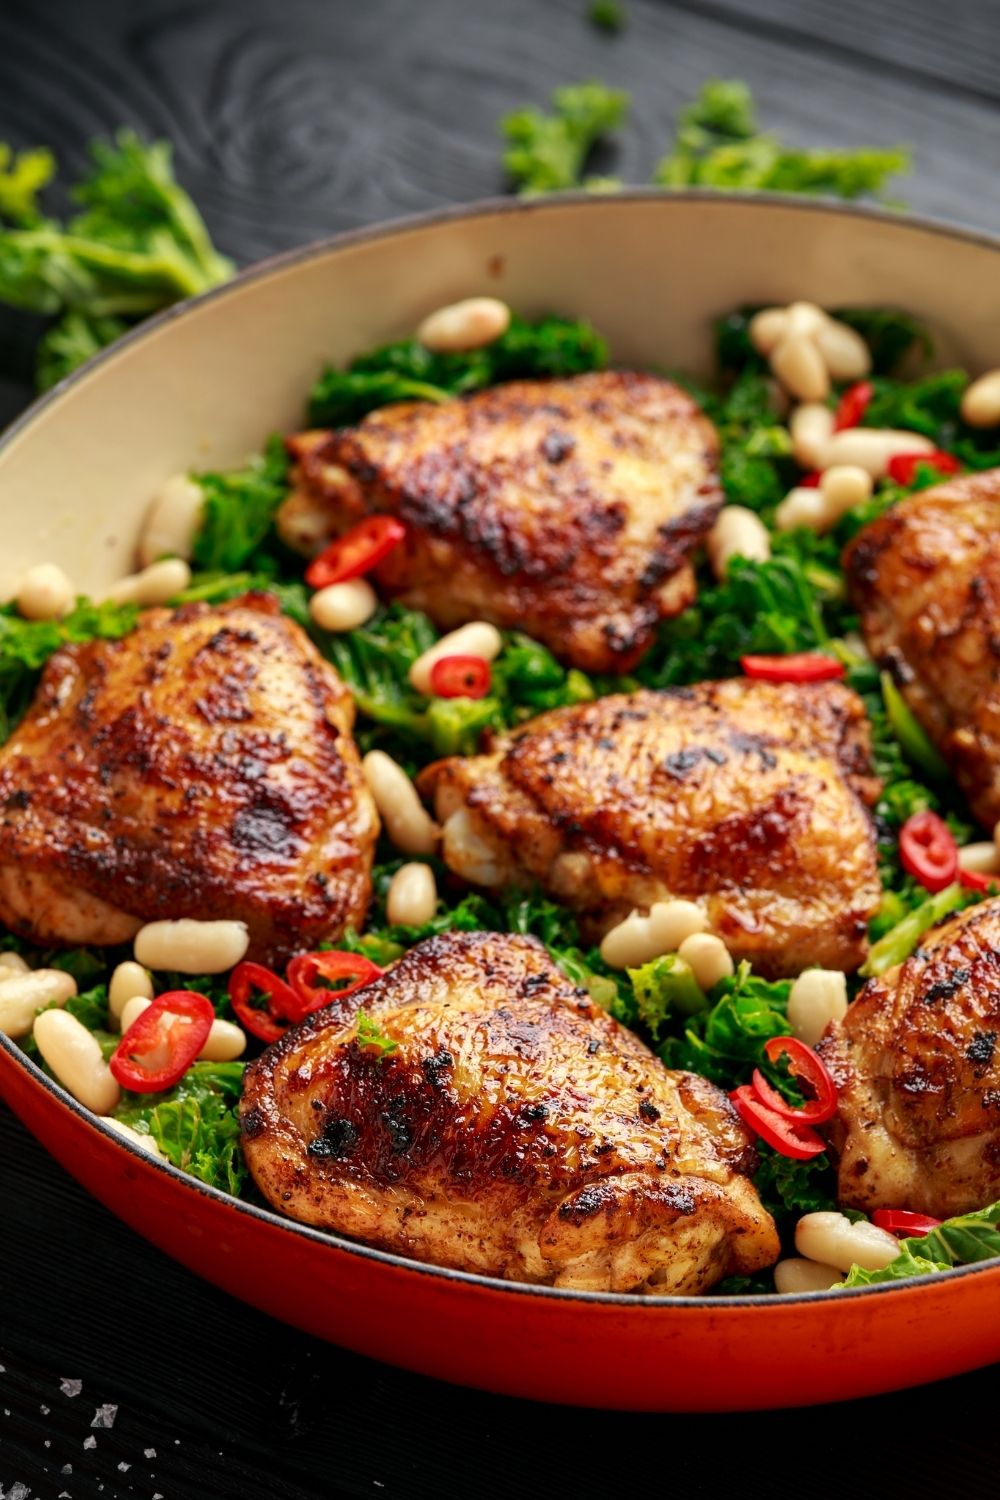 23 One-Pot Chicken Recipes (Easy Dinner Ideas) - Insanely Good